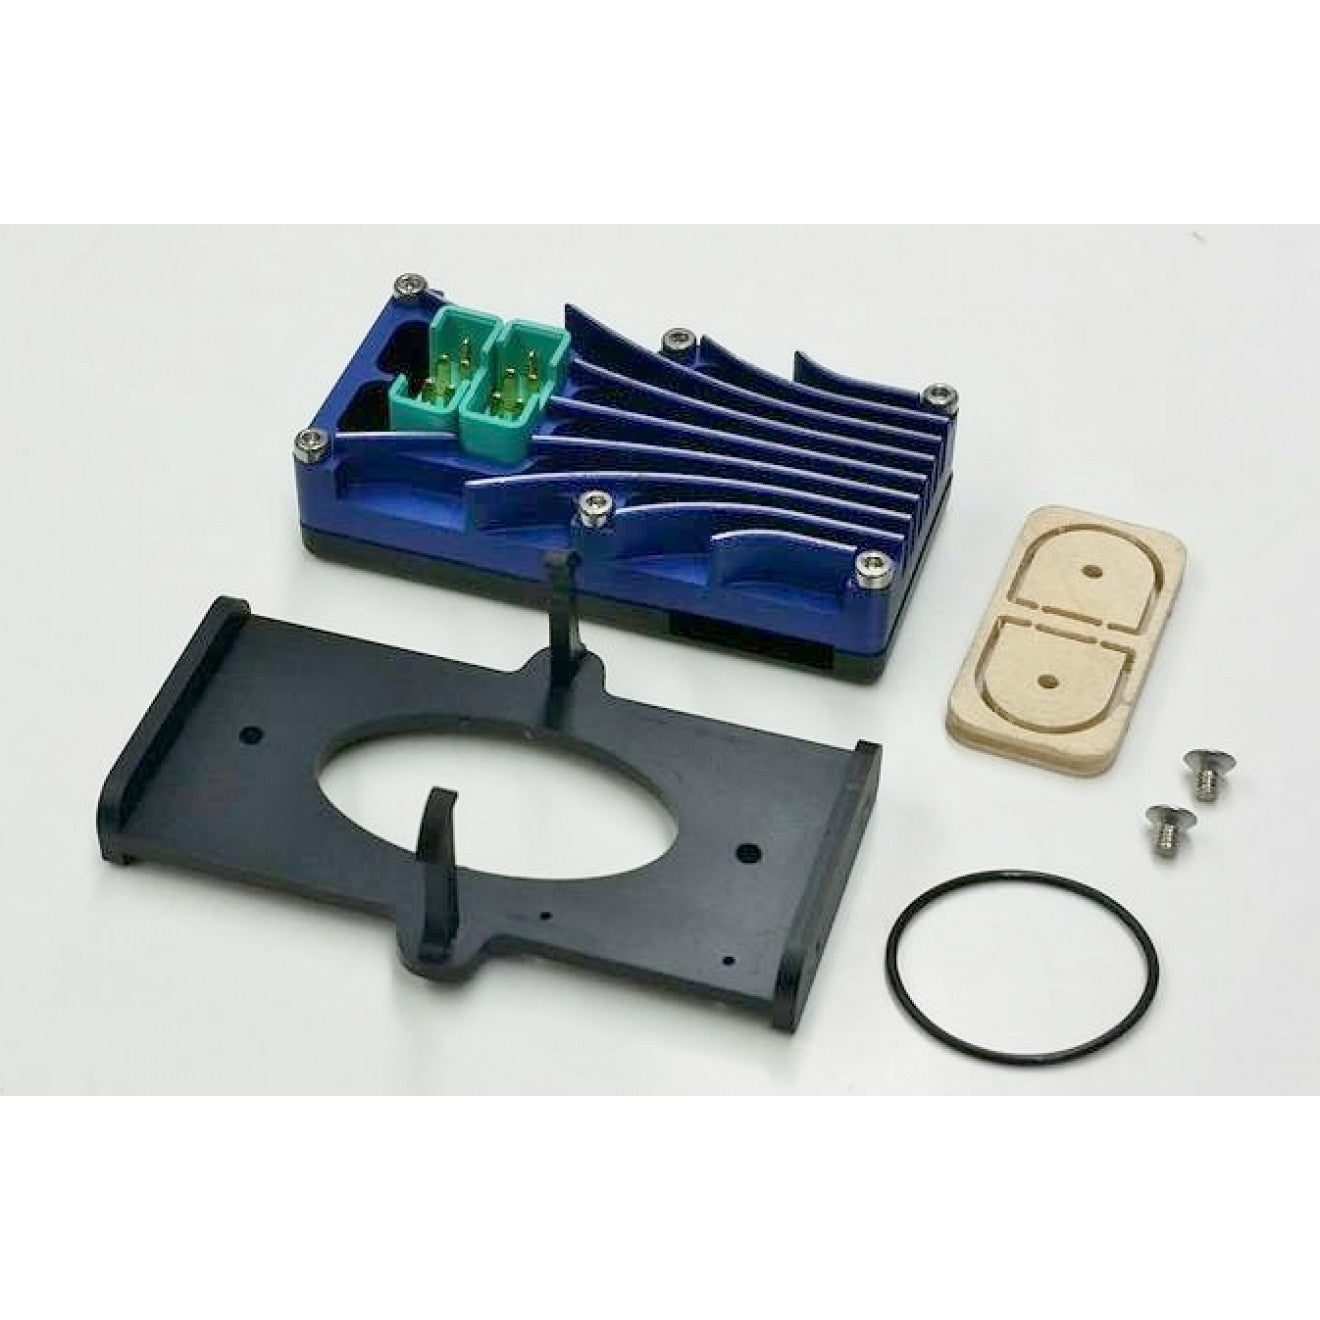 PowerBox Systems Gemini 2 Click Holder from STV-Tech 021-07